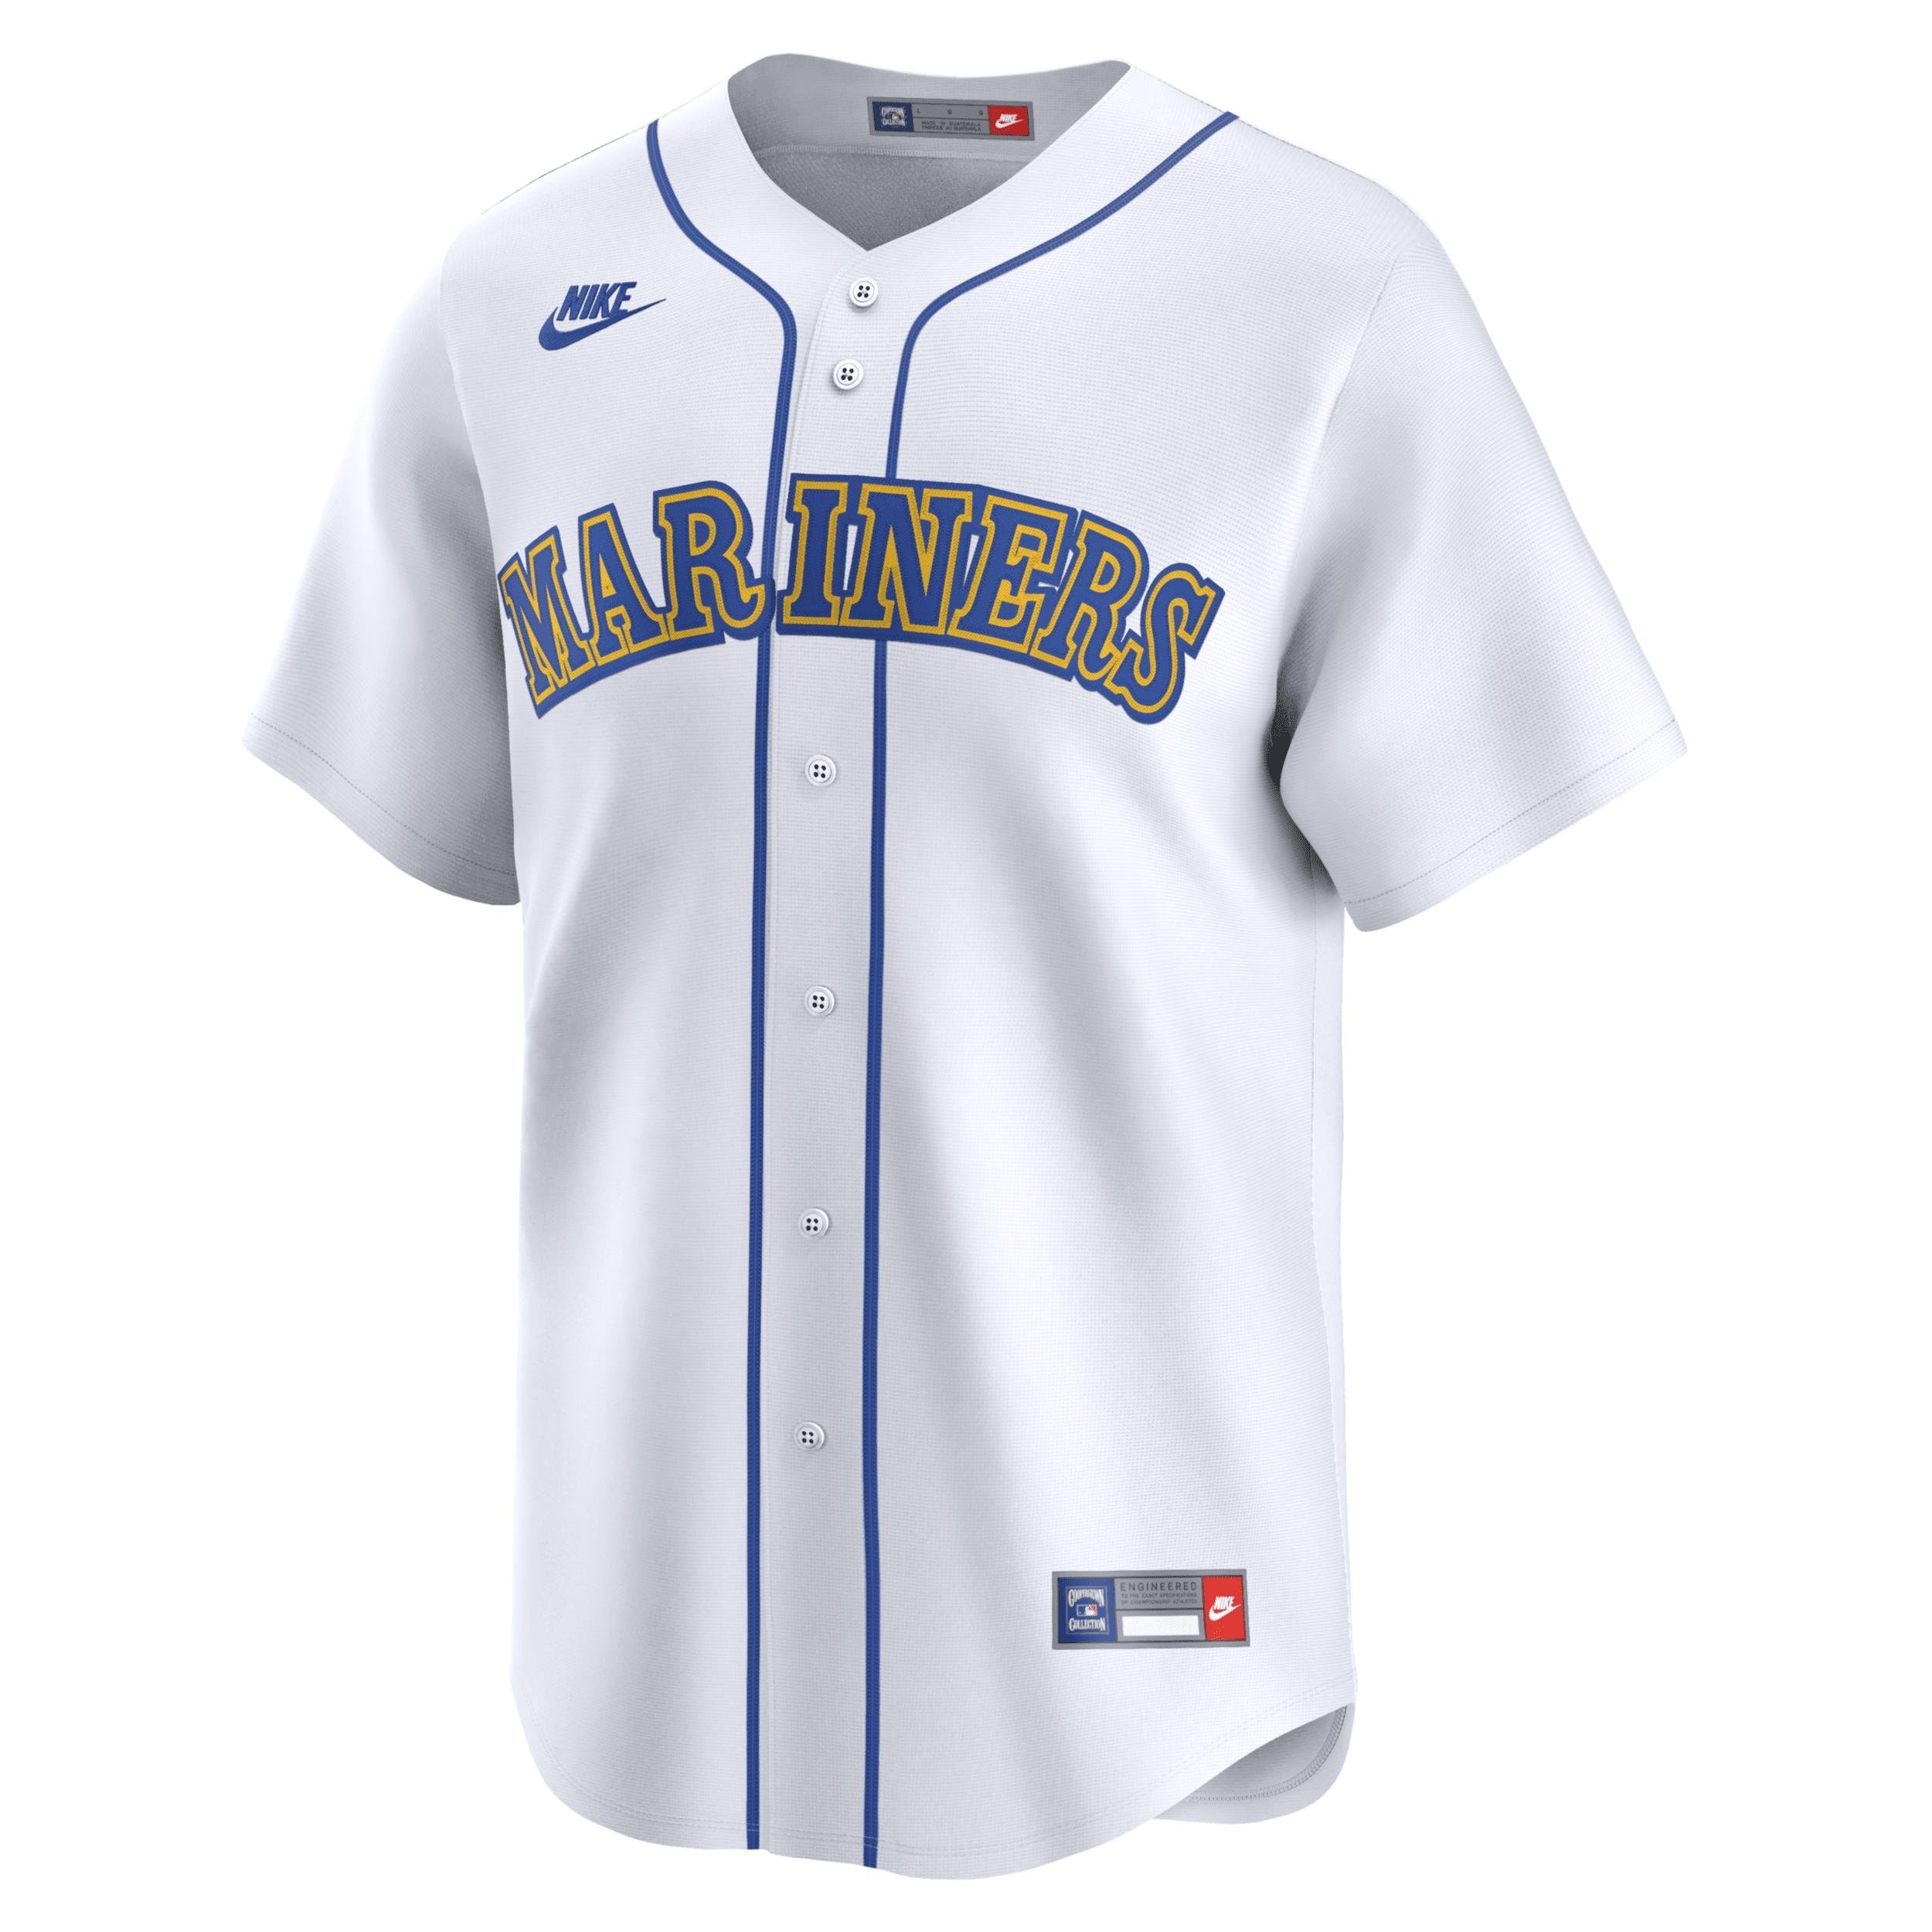 Seattle Mariners Cooperstown Nike Men's Dri-FIT ADV MLB Limited Jersey by NIKE